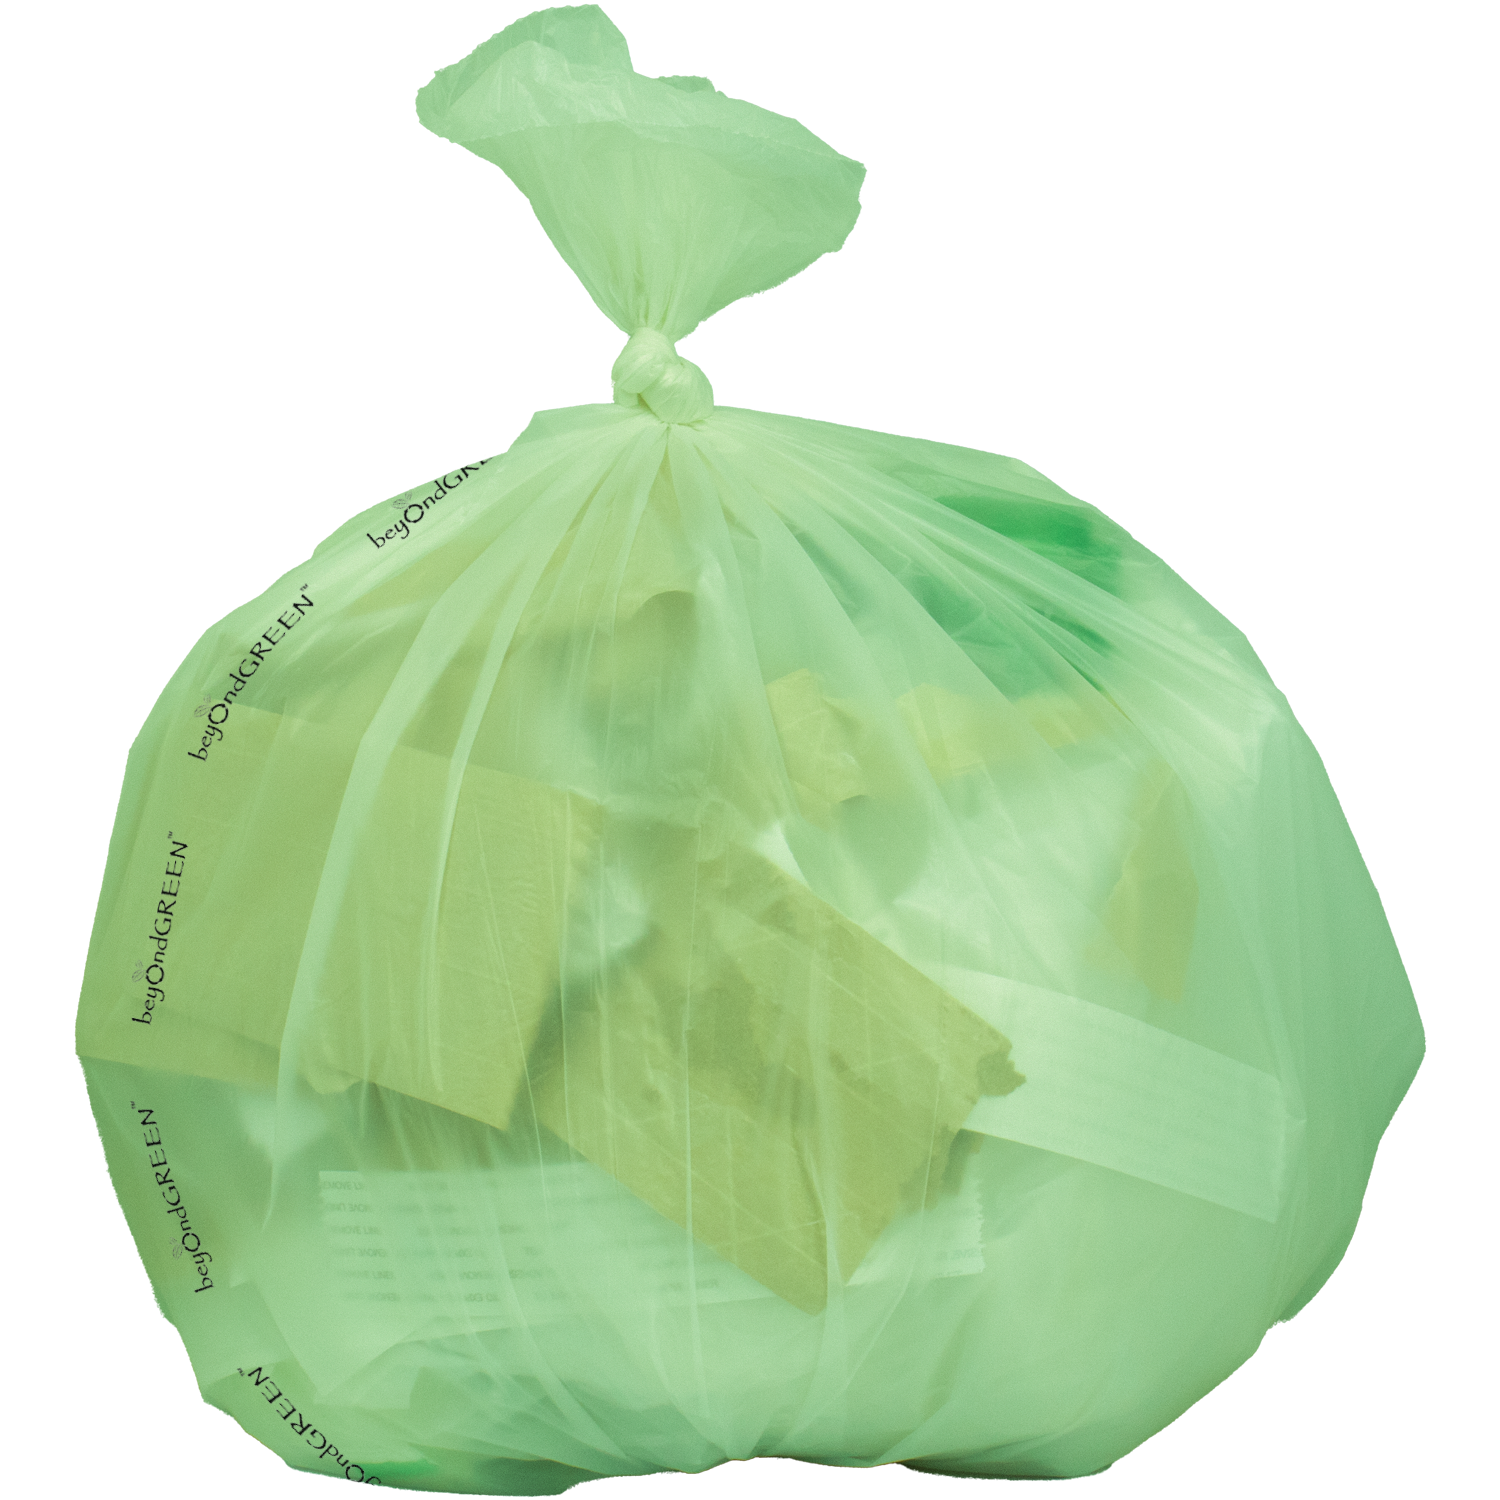 Nexlyte 200 Count 5-Gallon Biodegradable Trash Bags 15-18 Liter Garbage Bags, 0.71 Mil Thick, Green